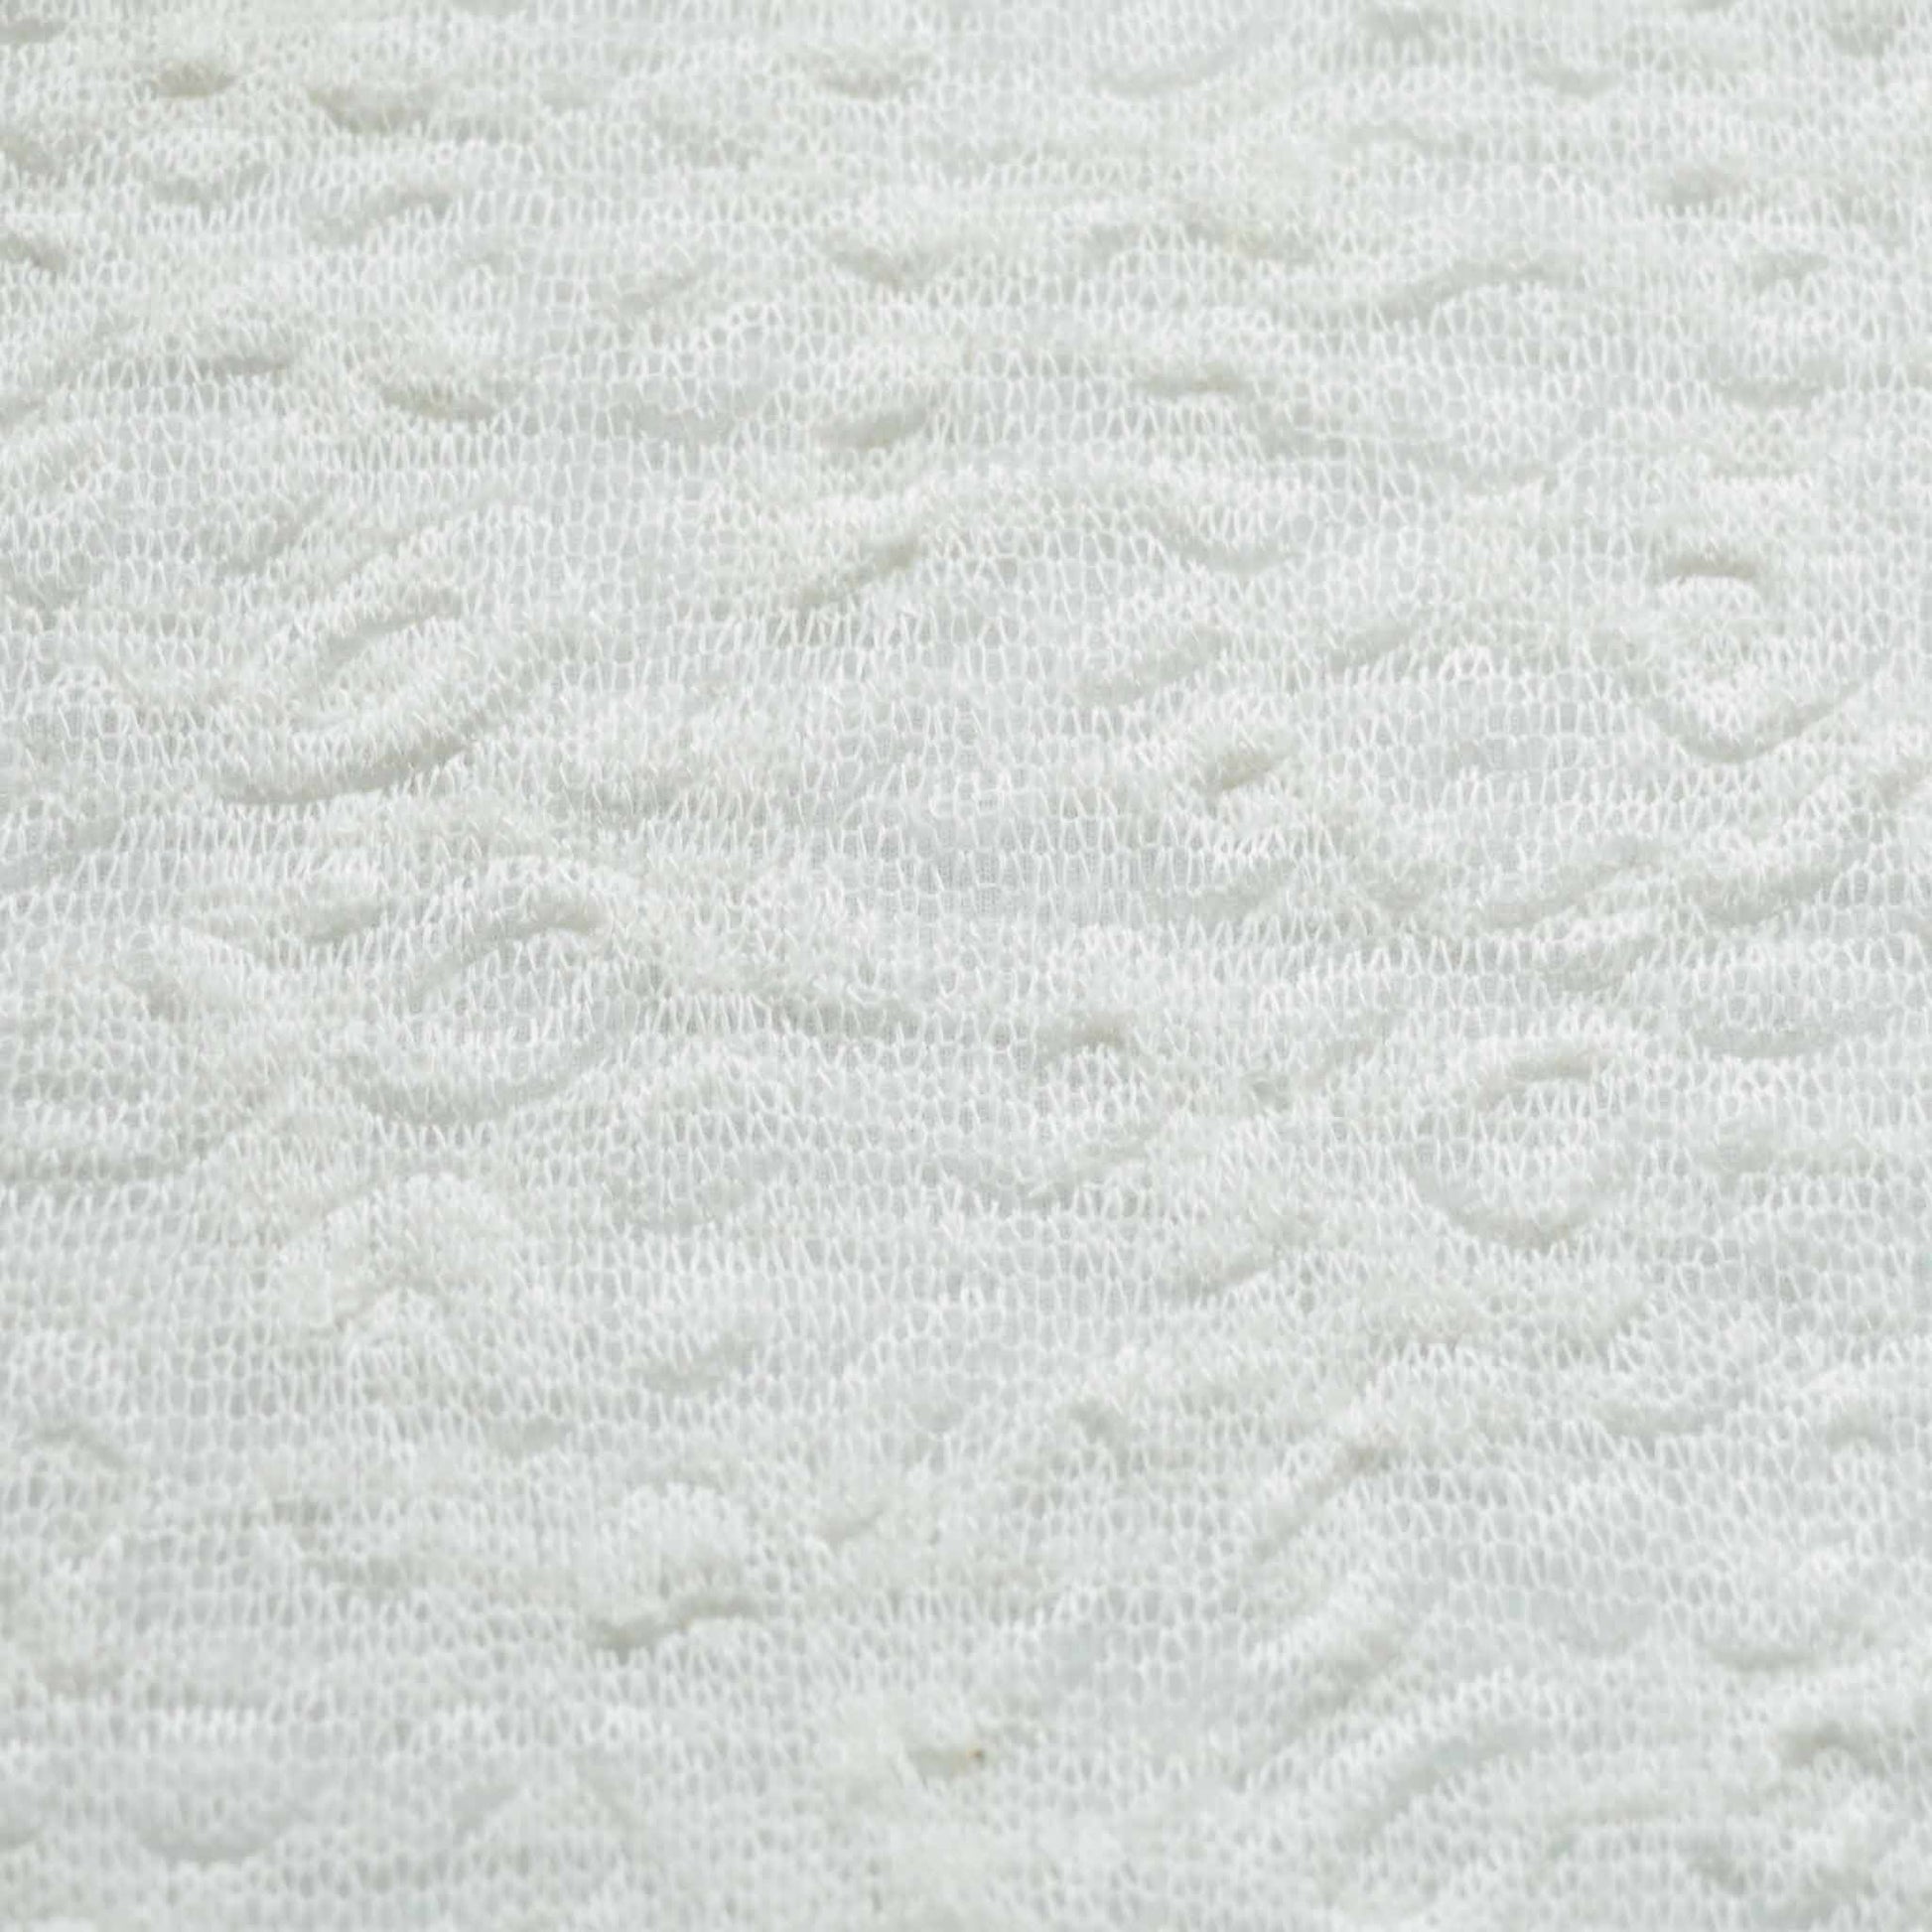 white jersey dressmaking fabric with embossed pattern texture